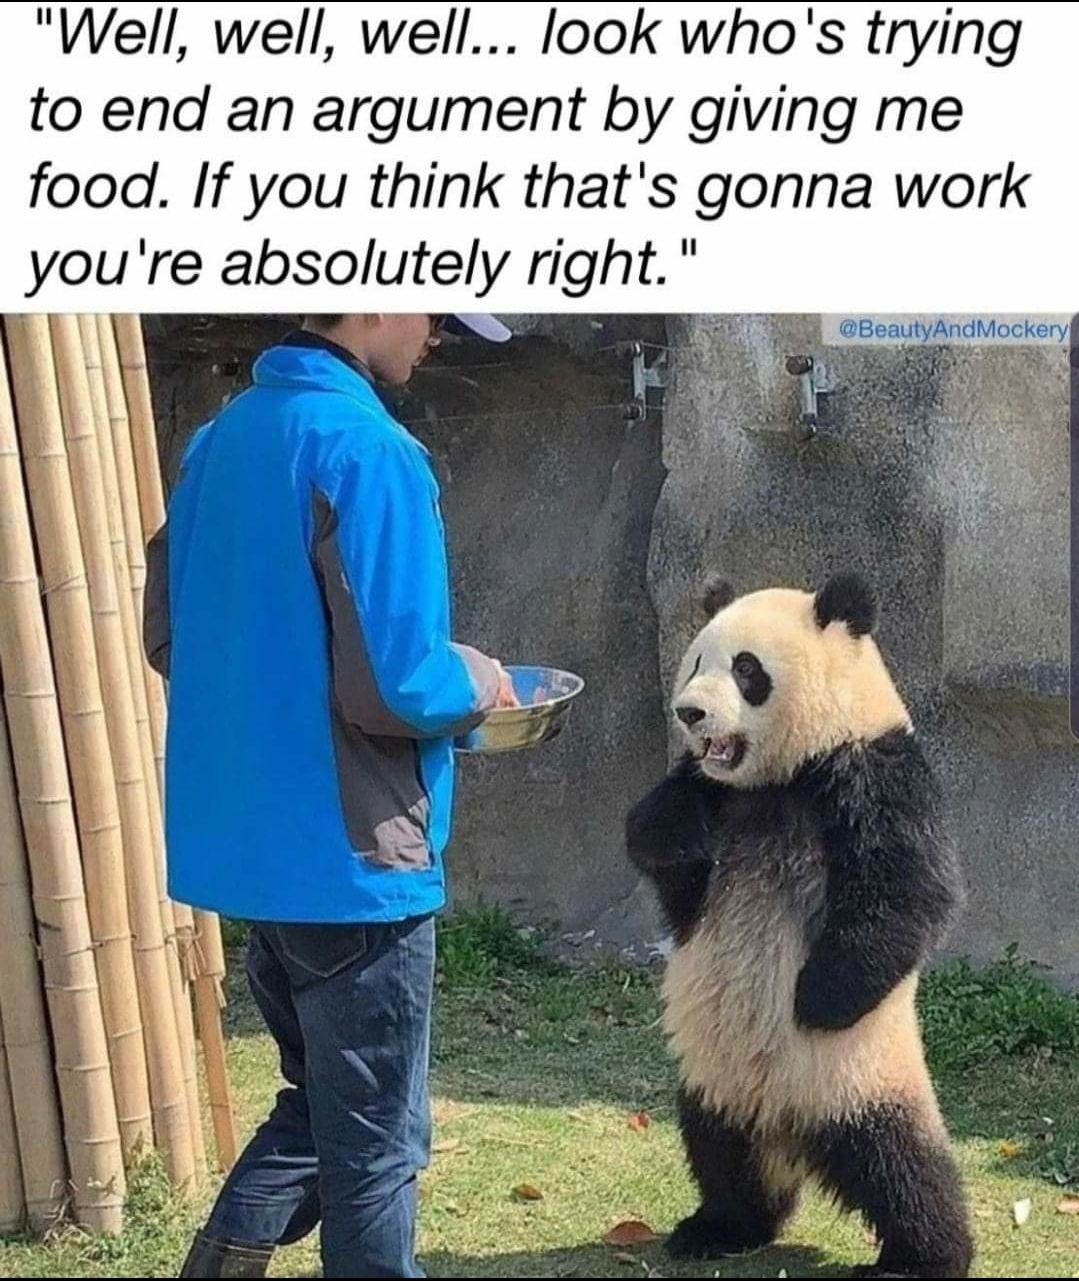 panda standing - "Well, well, well... look who's trying to end an argument by giving me food. If you think that's gonna work you're absolutely right." BeautyAndMockery